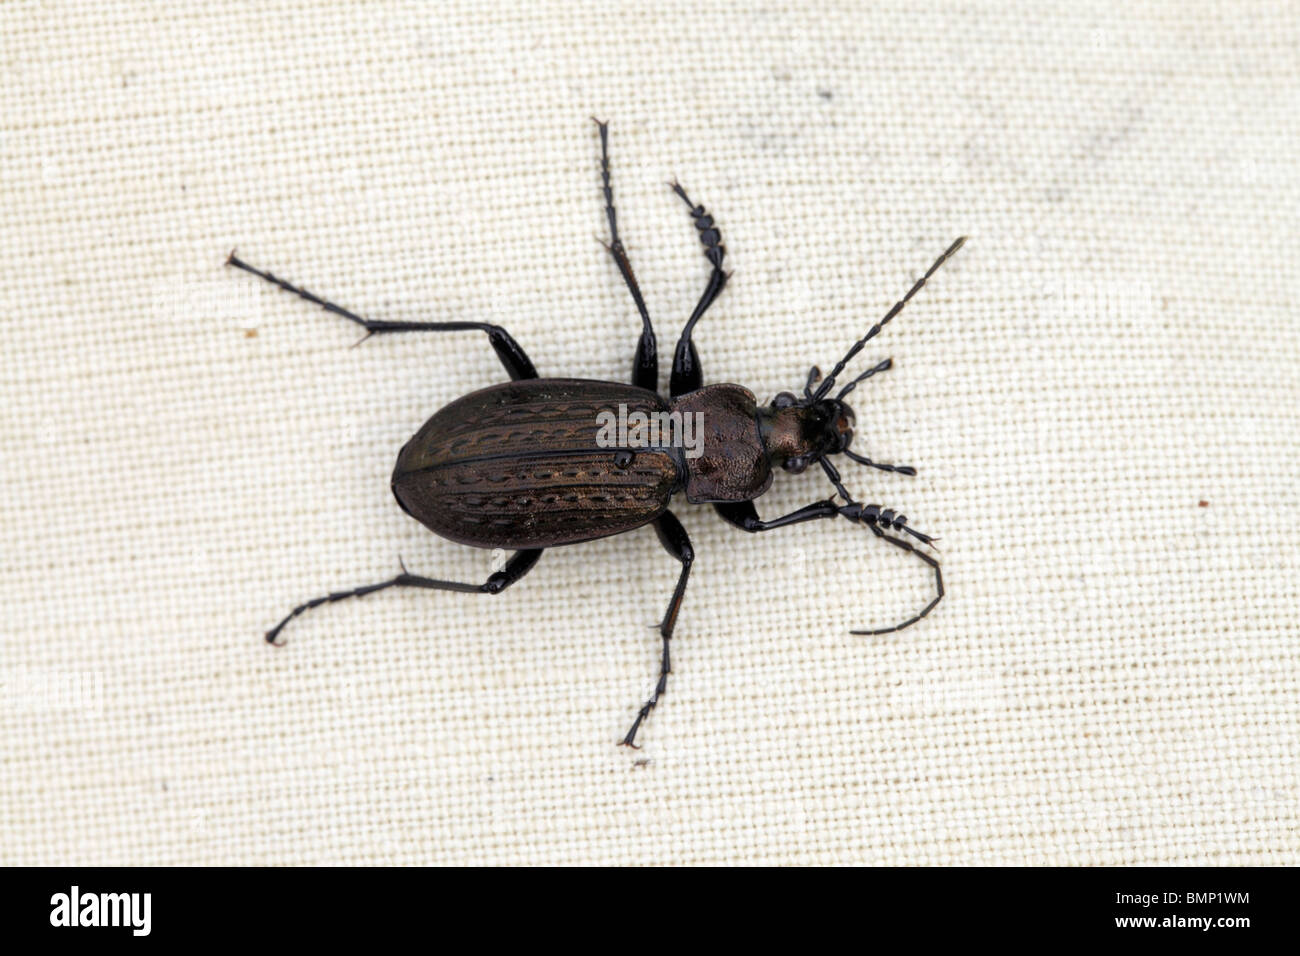 Alive, ground beetles grid Carabus cancellatus at the tissue background Stock Photo